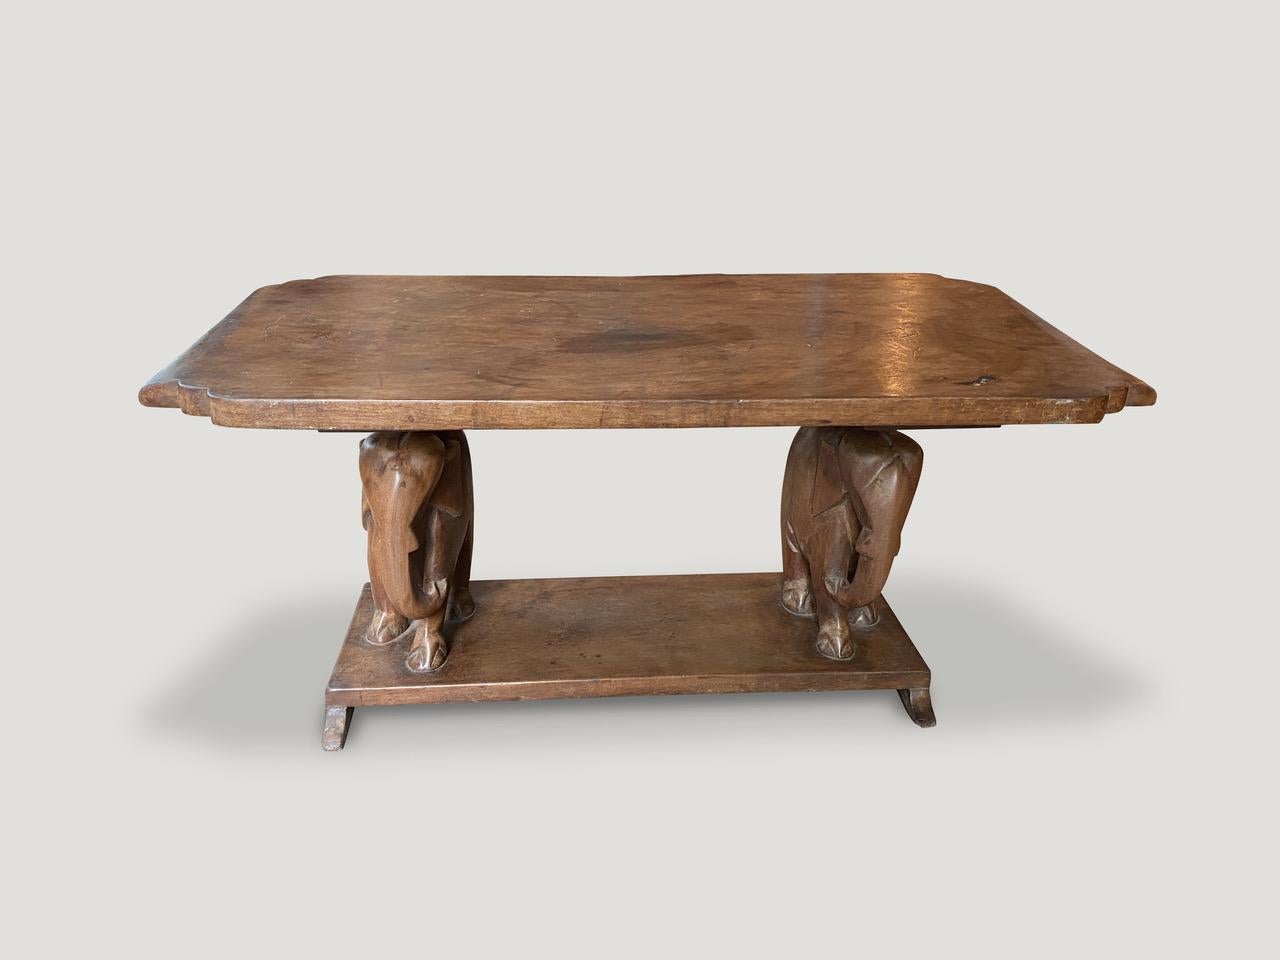 Whimsical coffee table from West Africa. Handmade from a single carved mahogany wood top with a hand carved elephant base.

This coffee table was sourced in the spirit of wabi-sabi, a Japanese philosophy that beauty can be found in imperfection